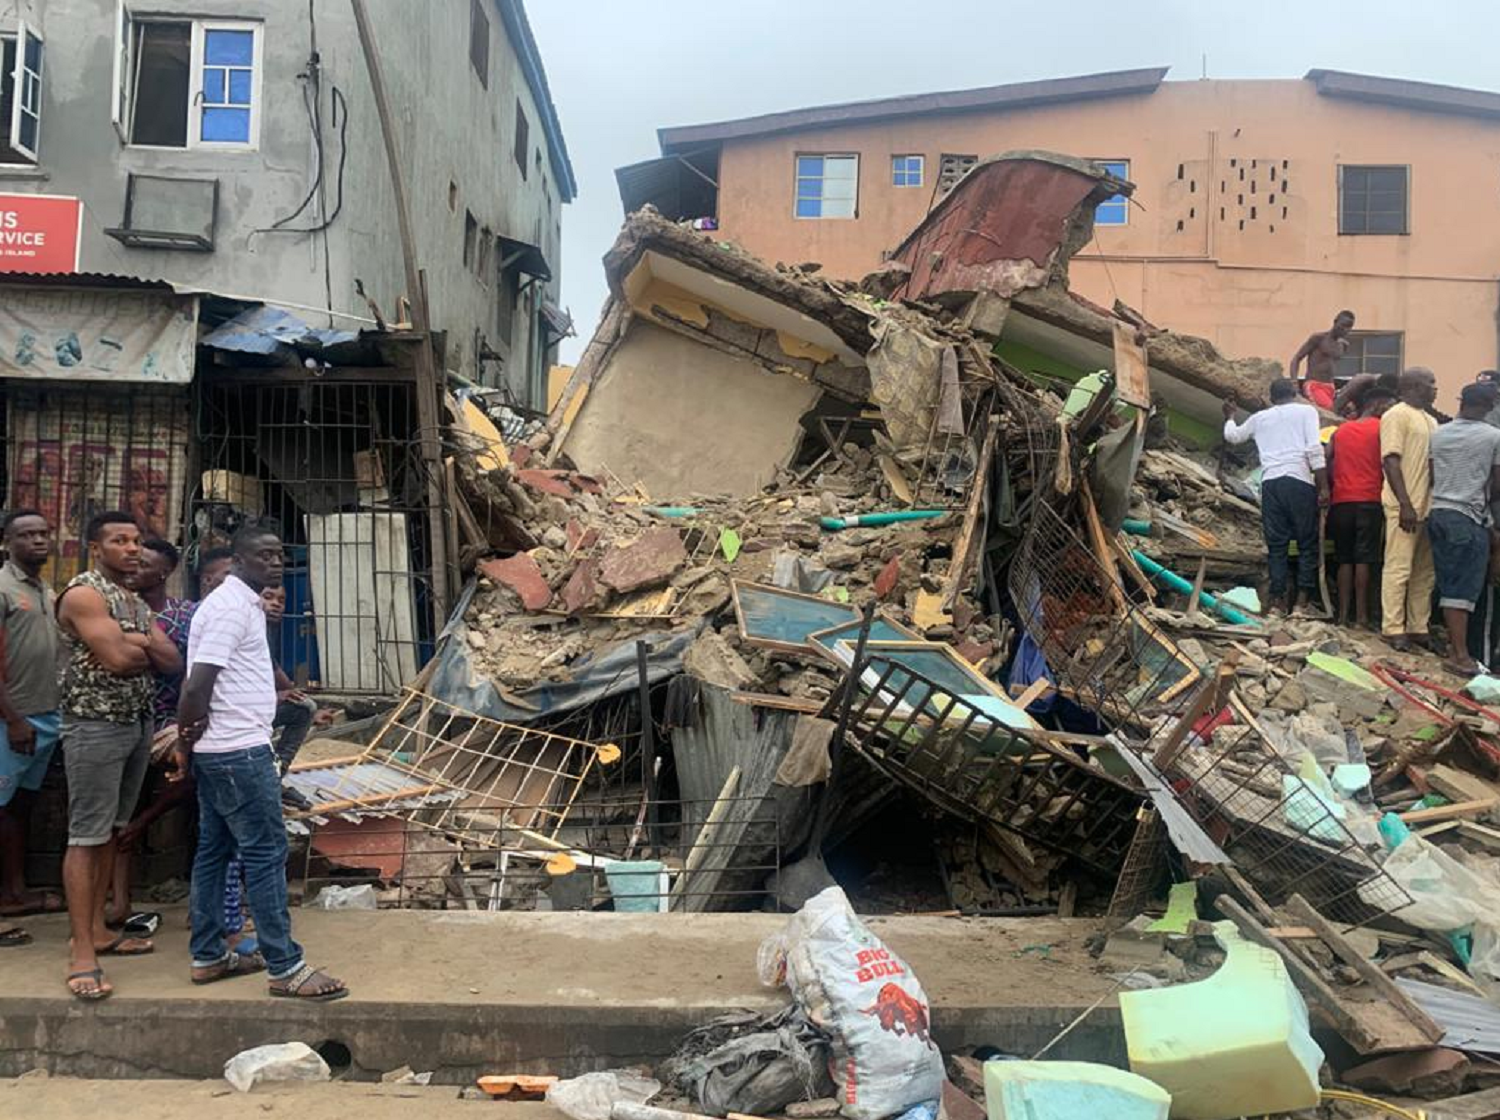 Residents evicted from distressed buildings find their way back, says Lagos Commissioner